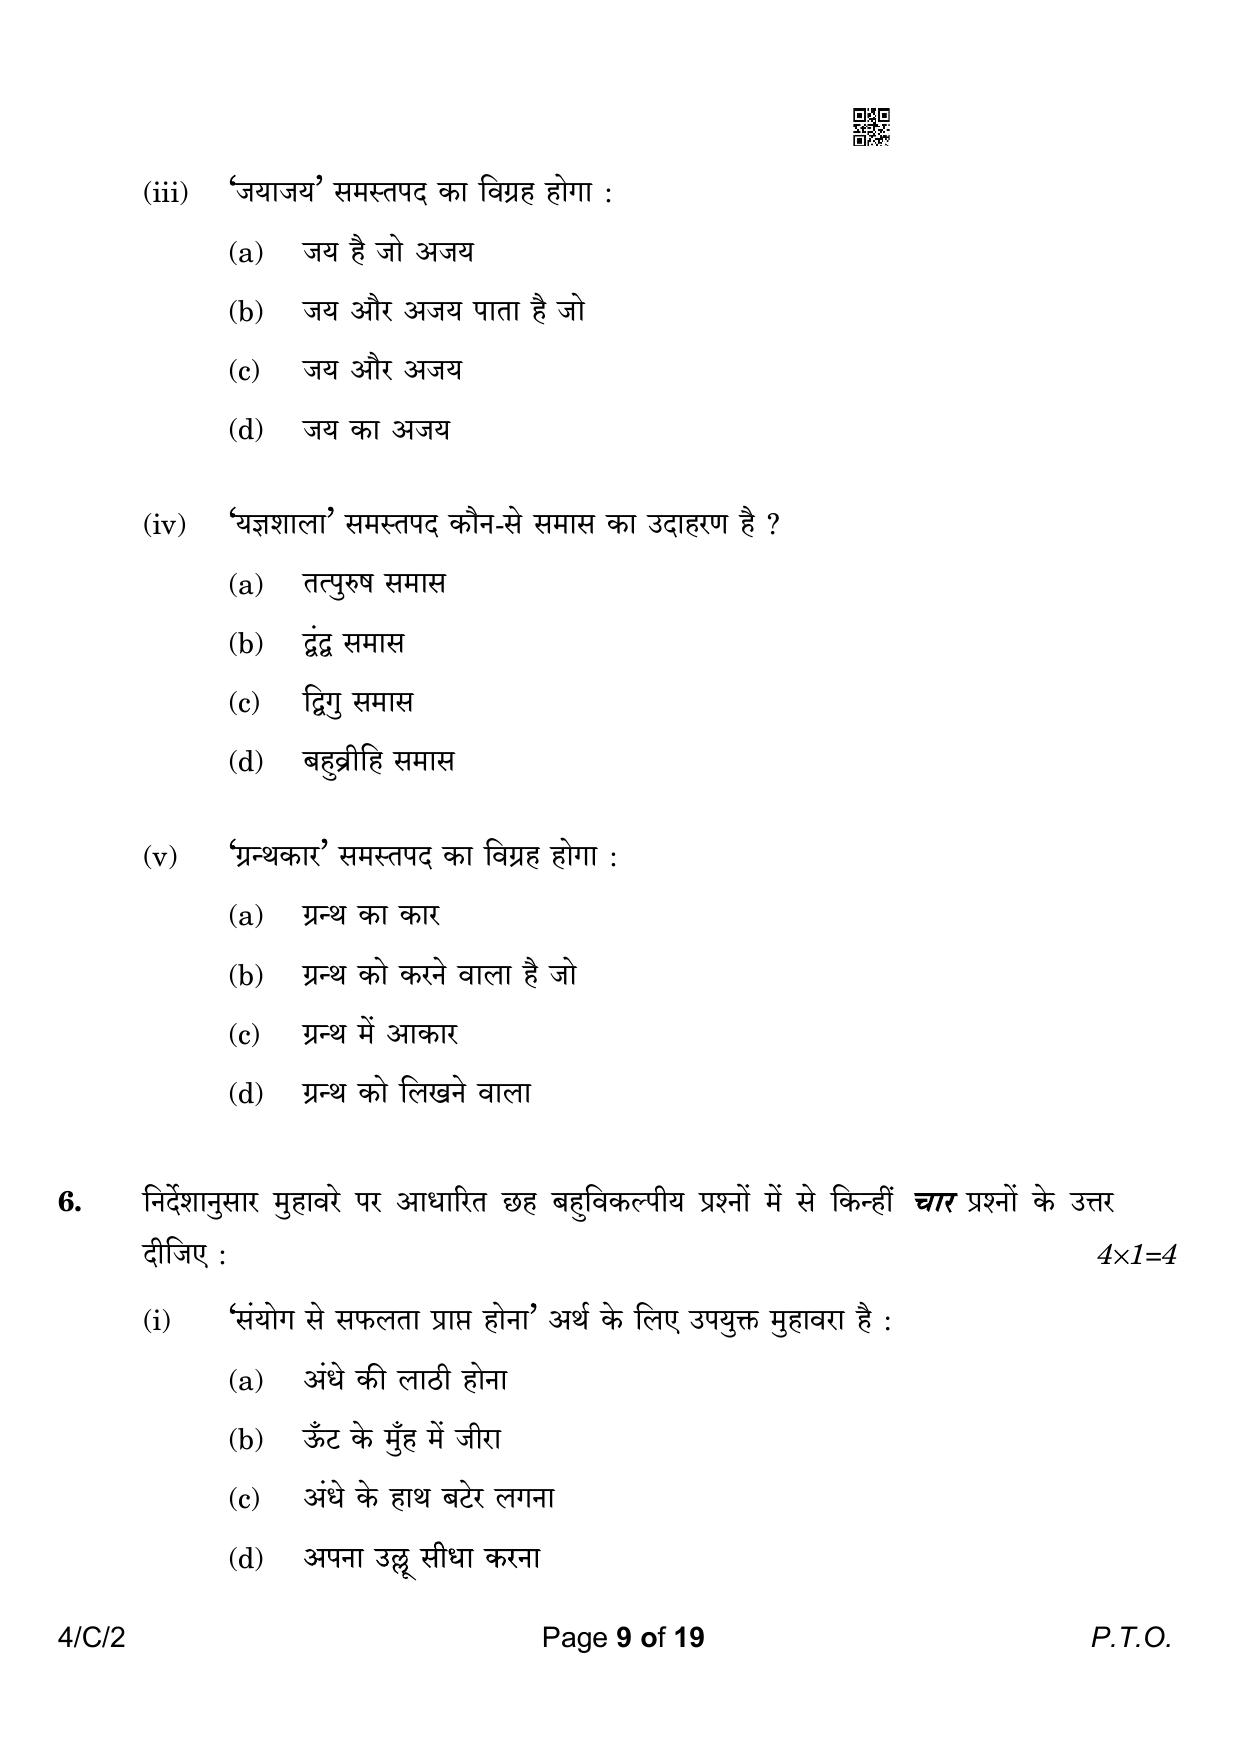 CBSE Class 10 4-2 Hindi B 2023 (Compartment) Question Paper - Page 9